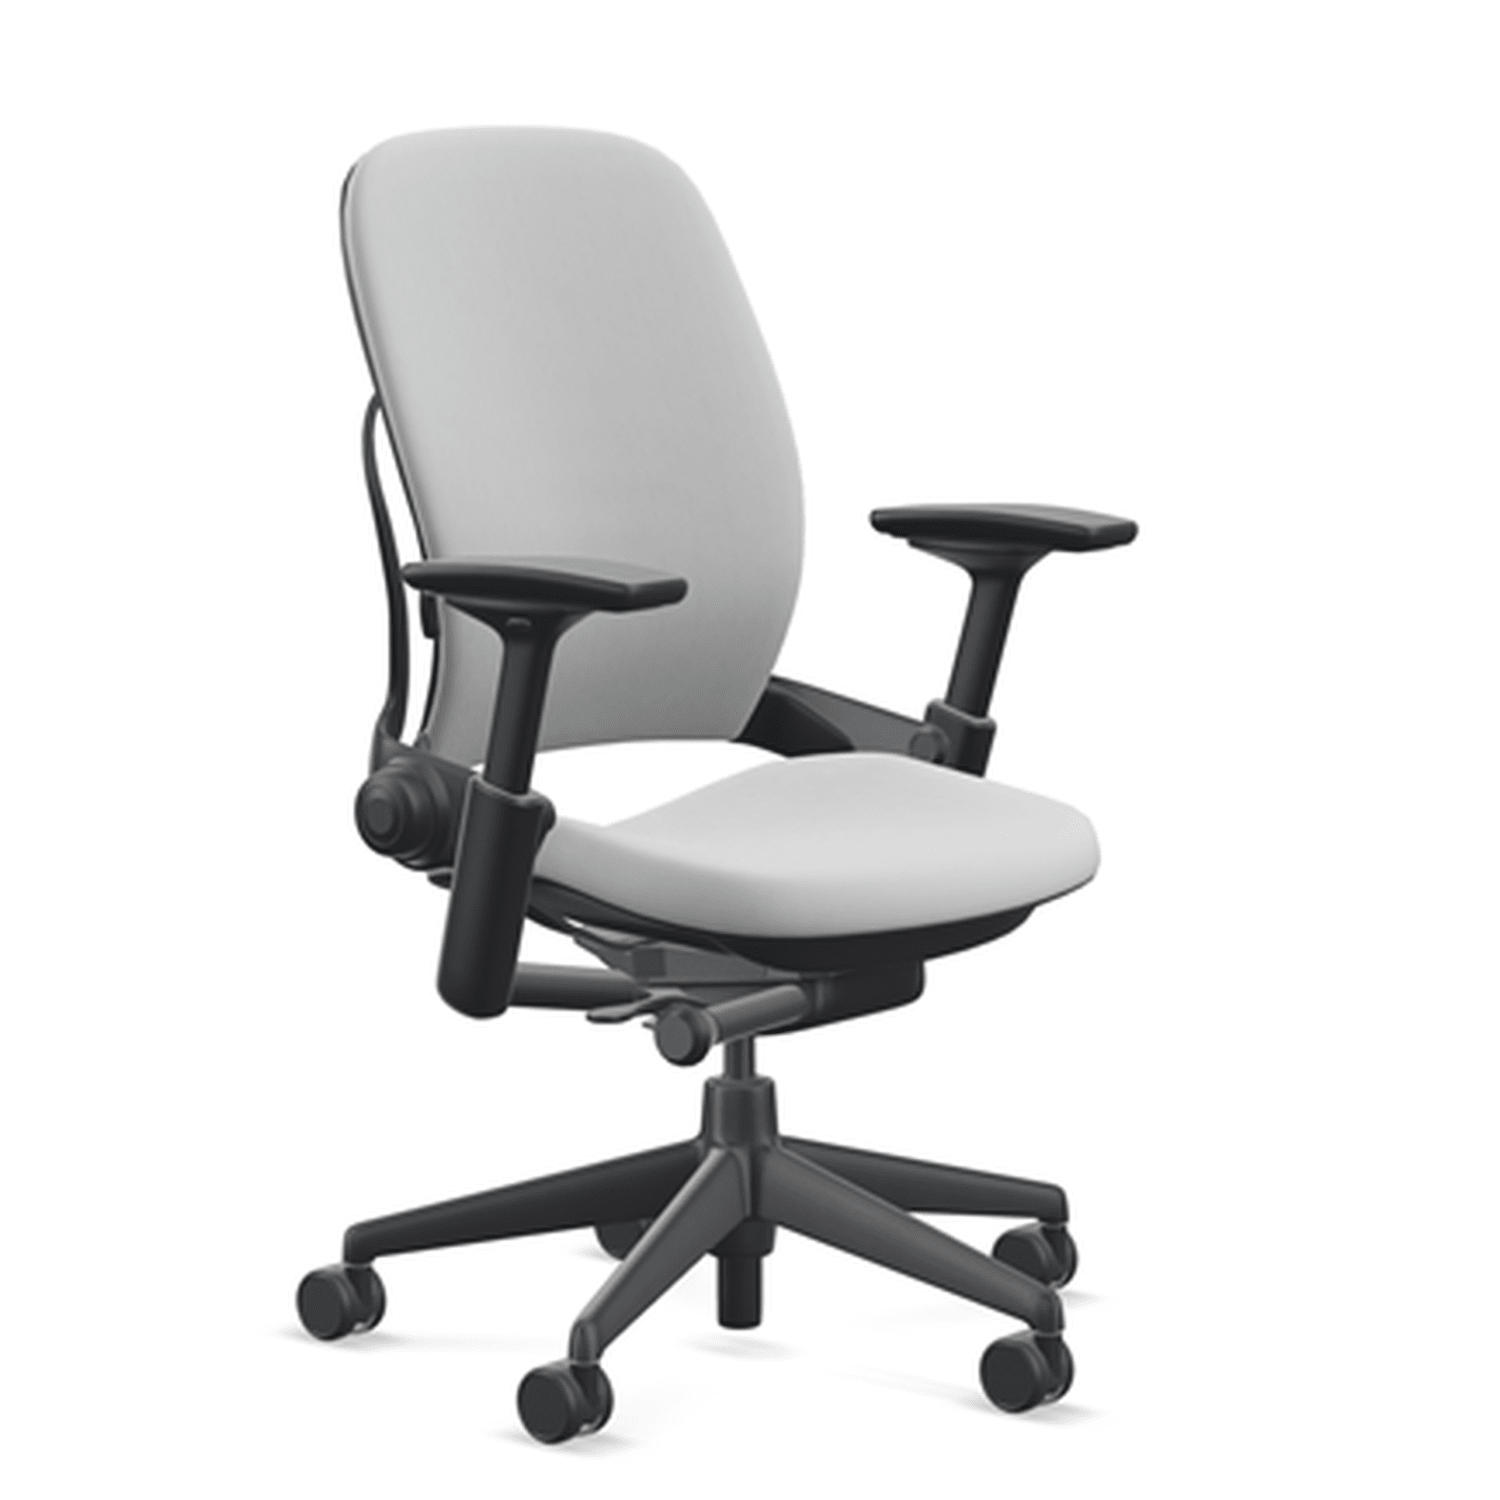 The best ergonomic office chairs in 2023